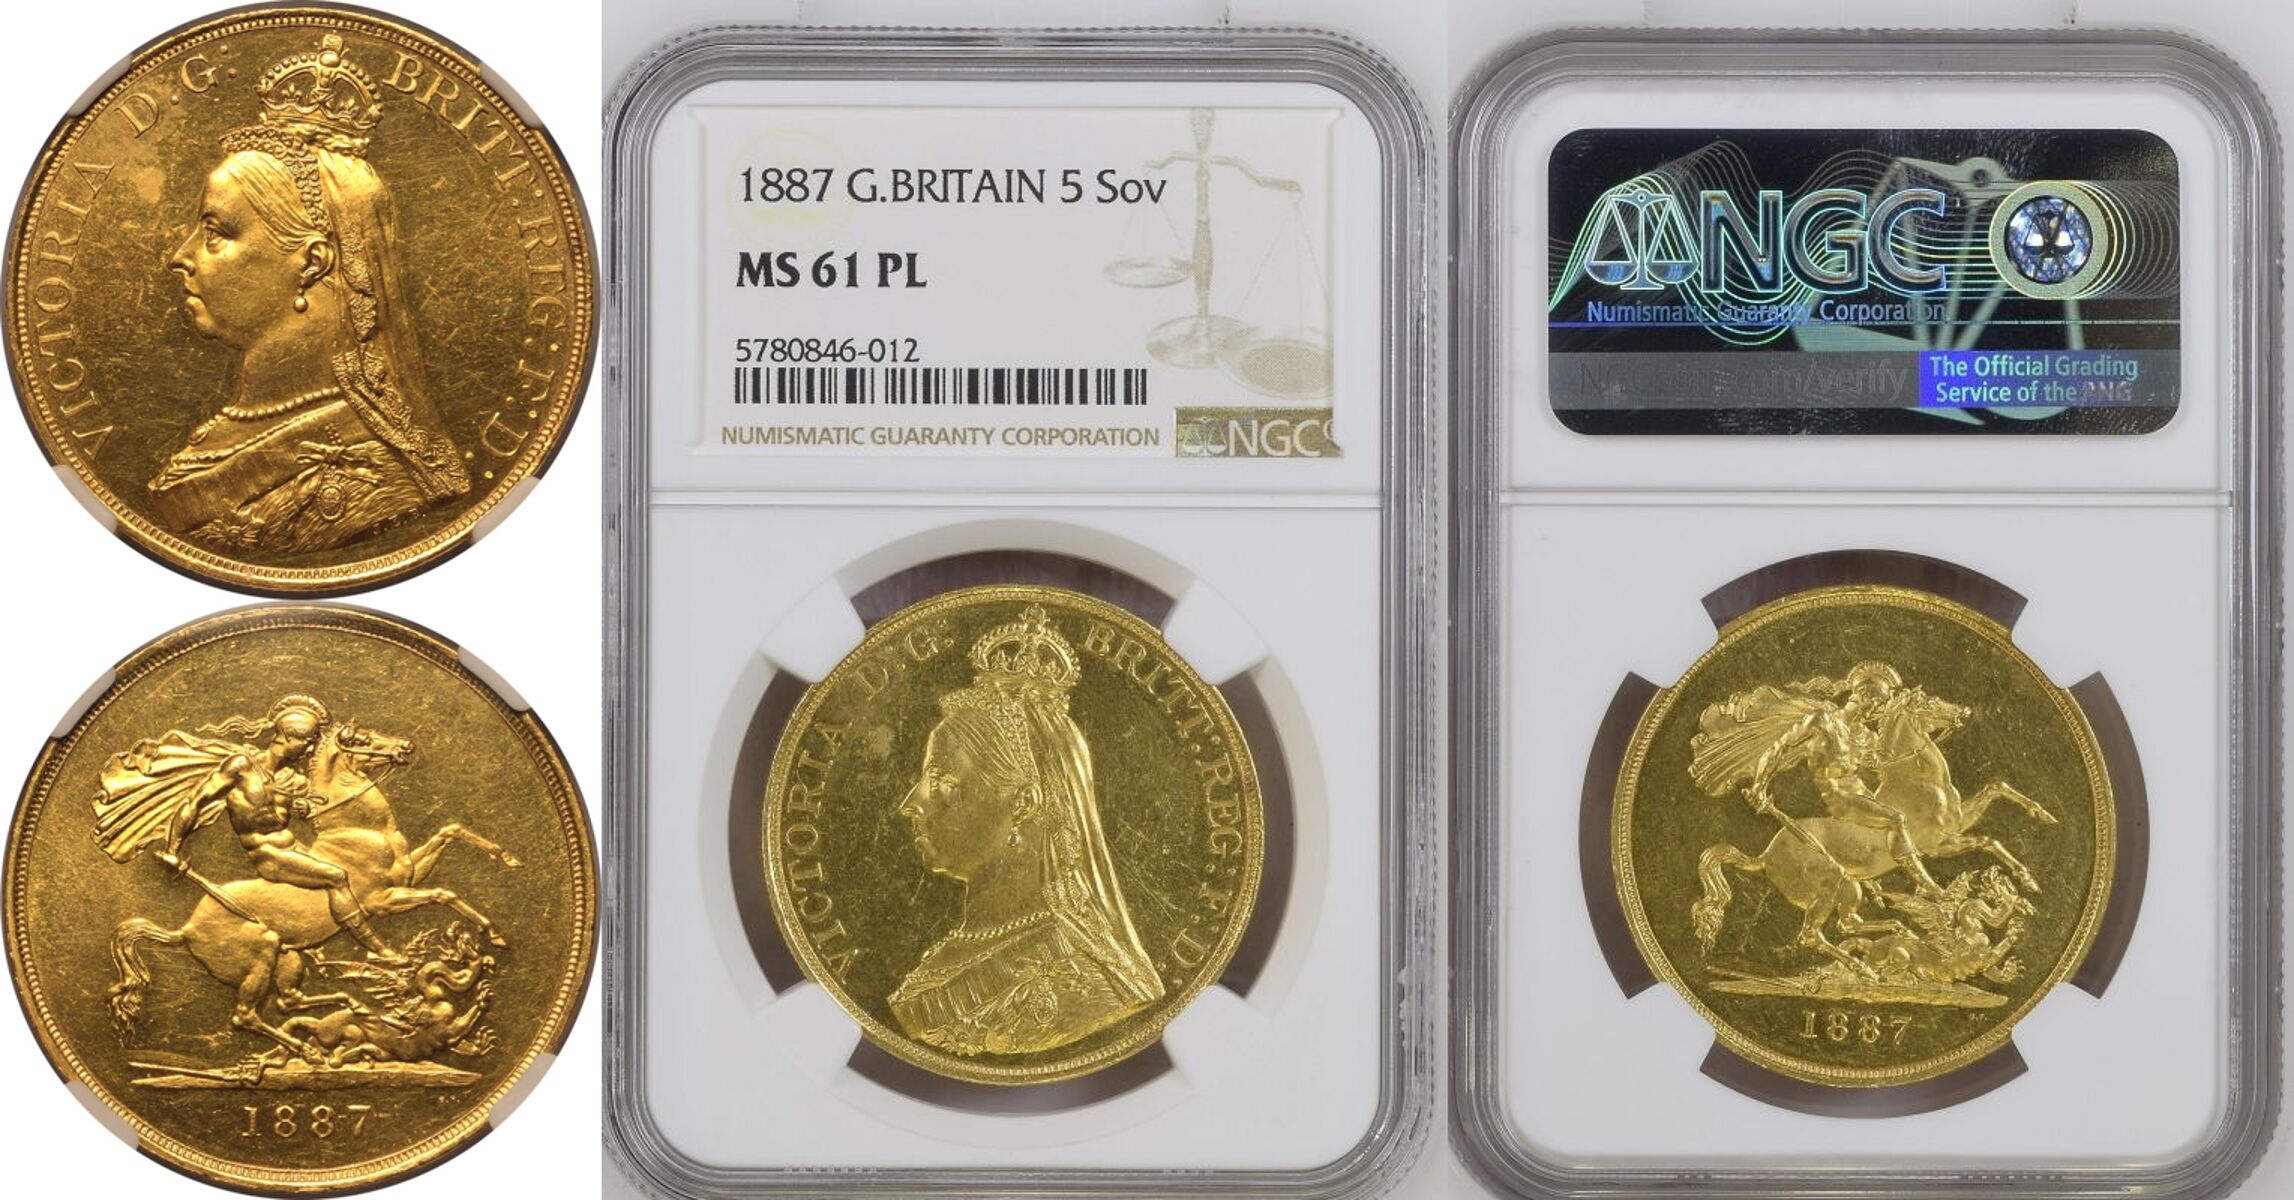 1887 Gold 5 Pounds (5 Sovereigns) NGC MS 61 PL - Image 7 of 7